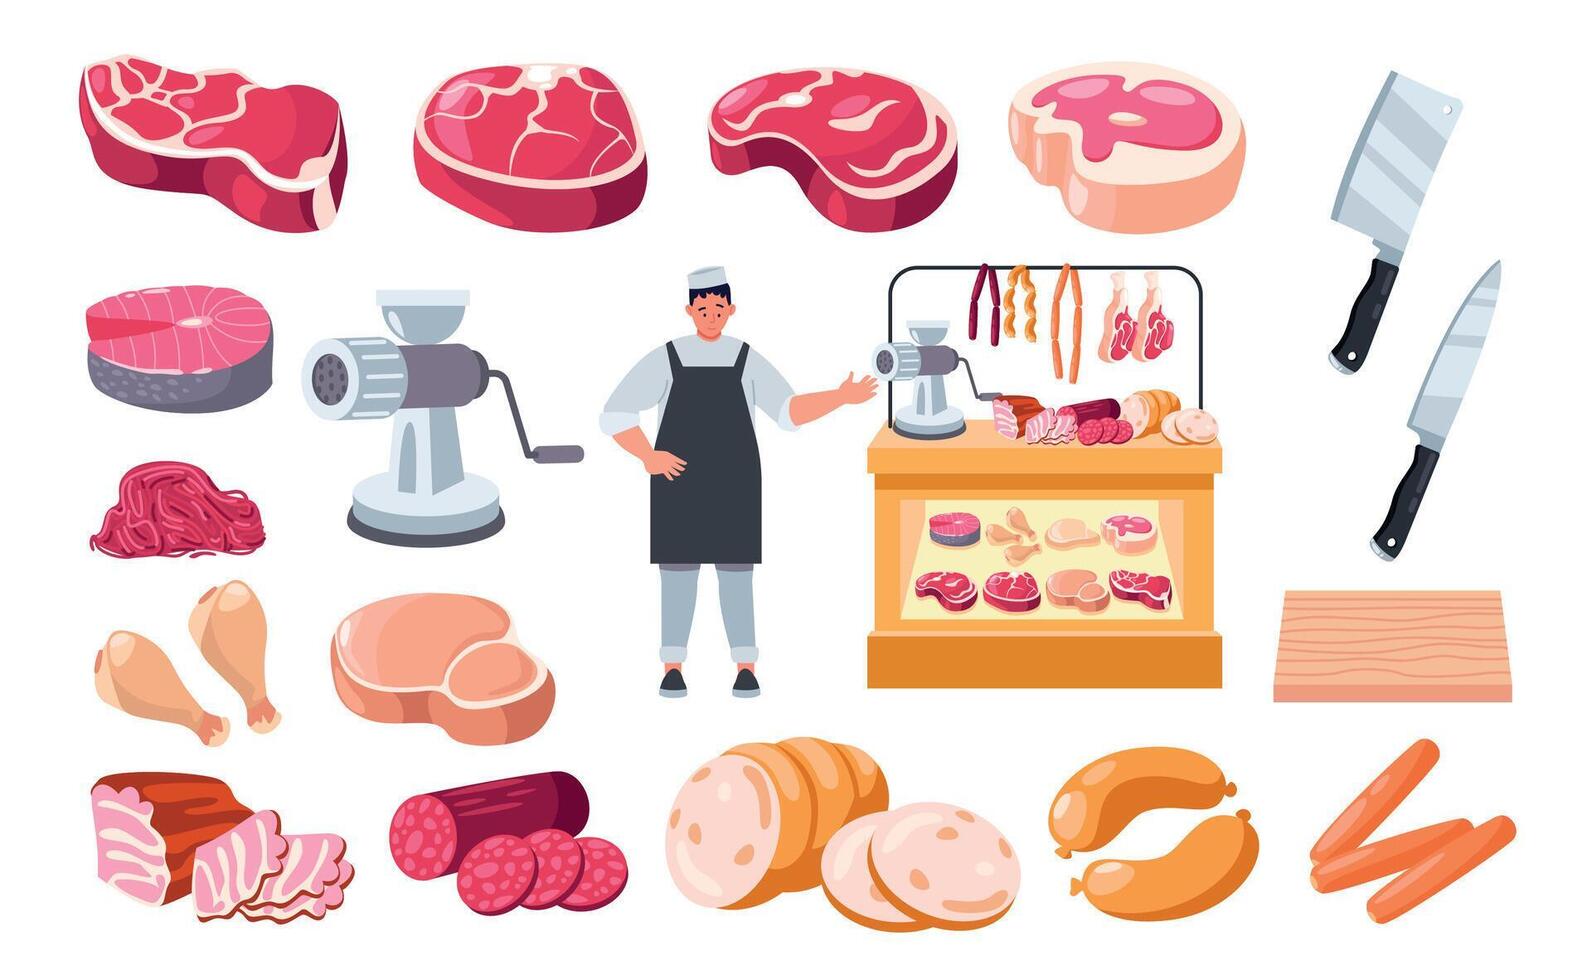 Cartoon butcher with meat. Man character with knife in chef uniform offering fresh products, sausages beef pork steaks, grocery store concept. Vector illustration